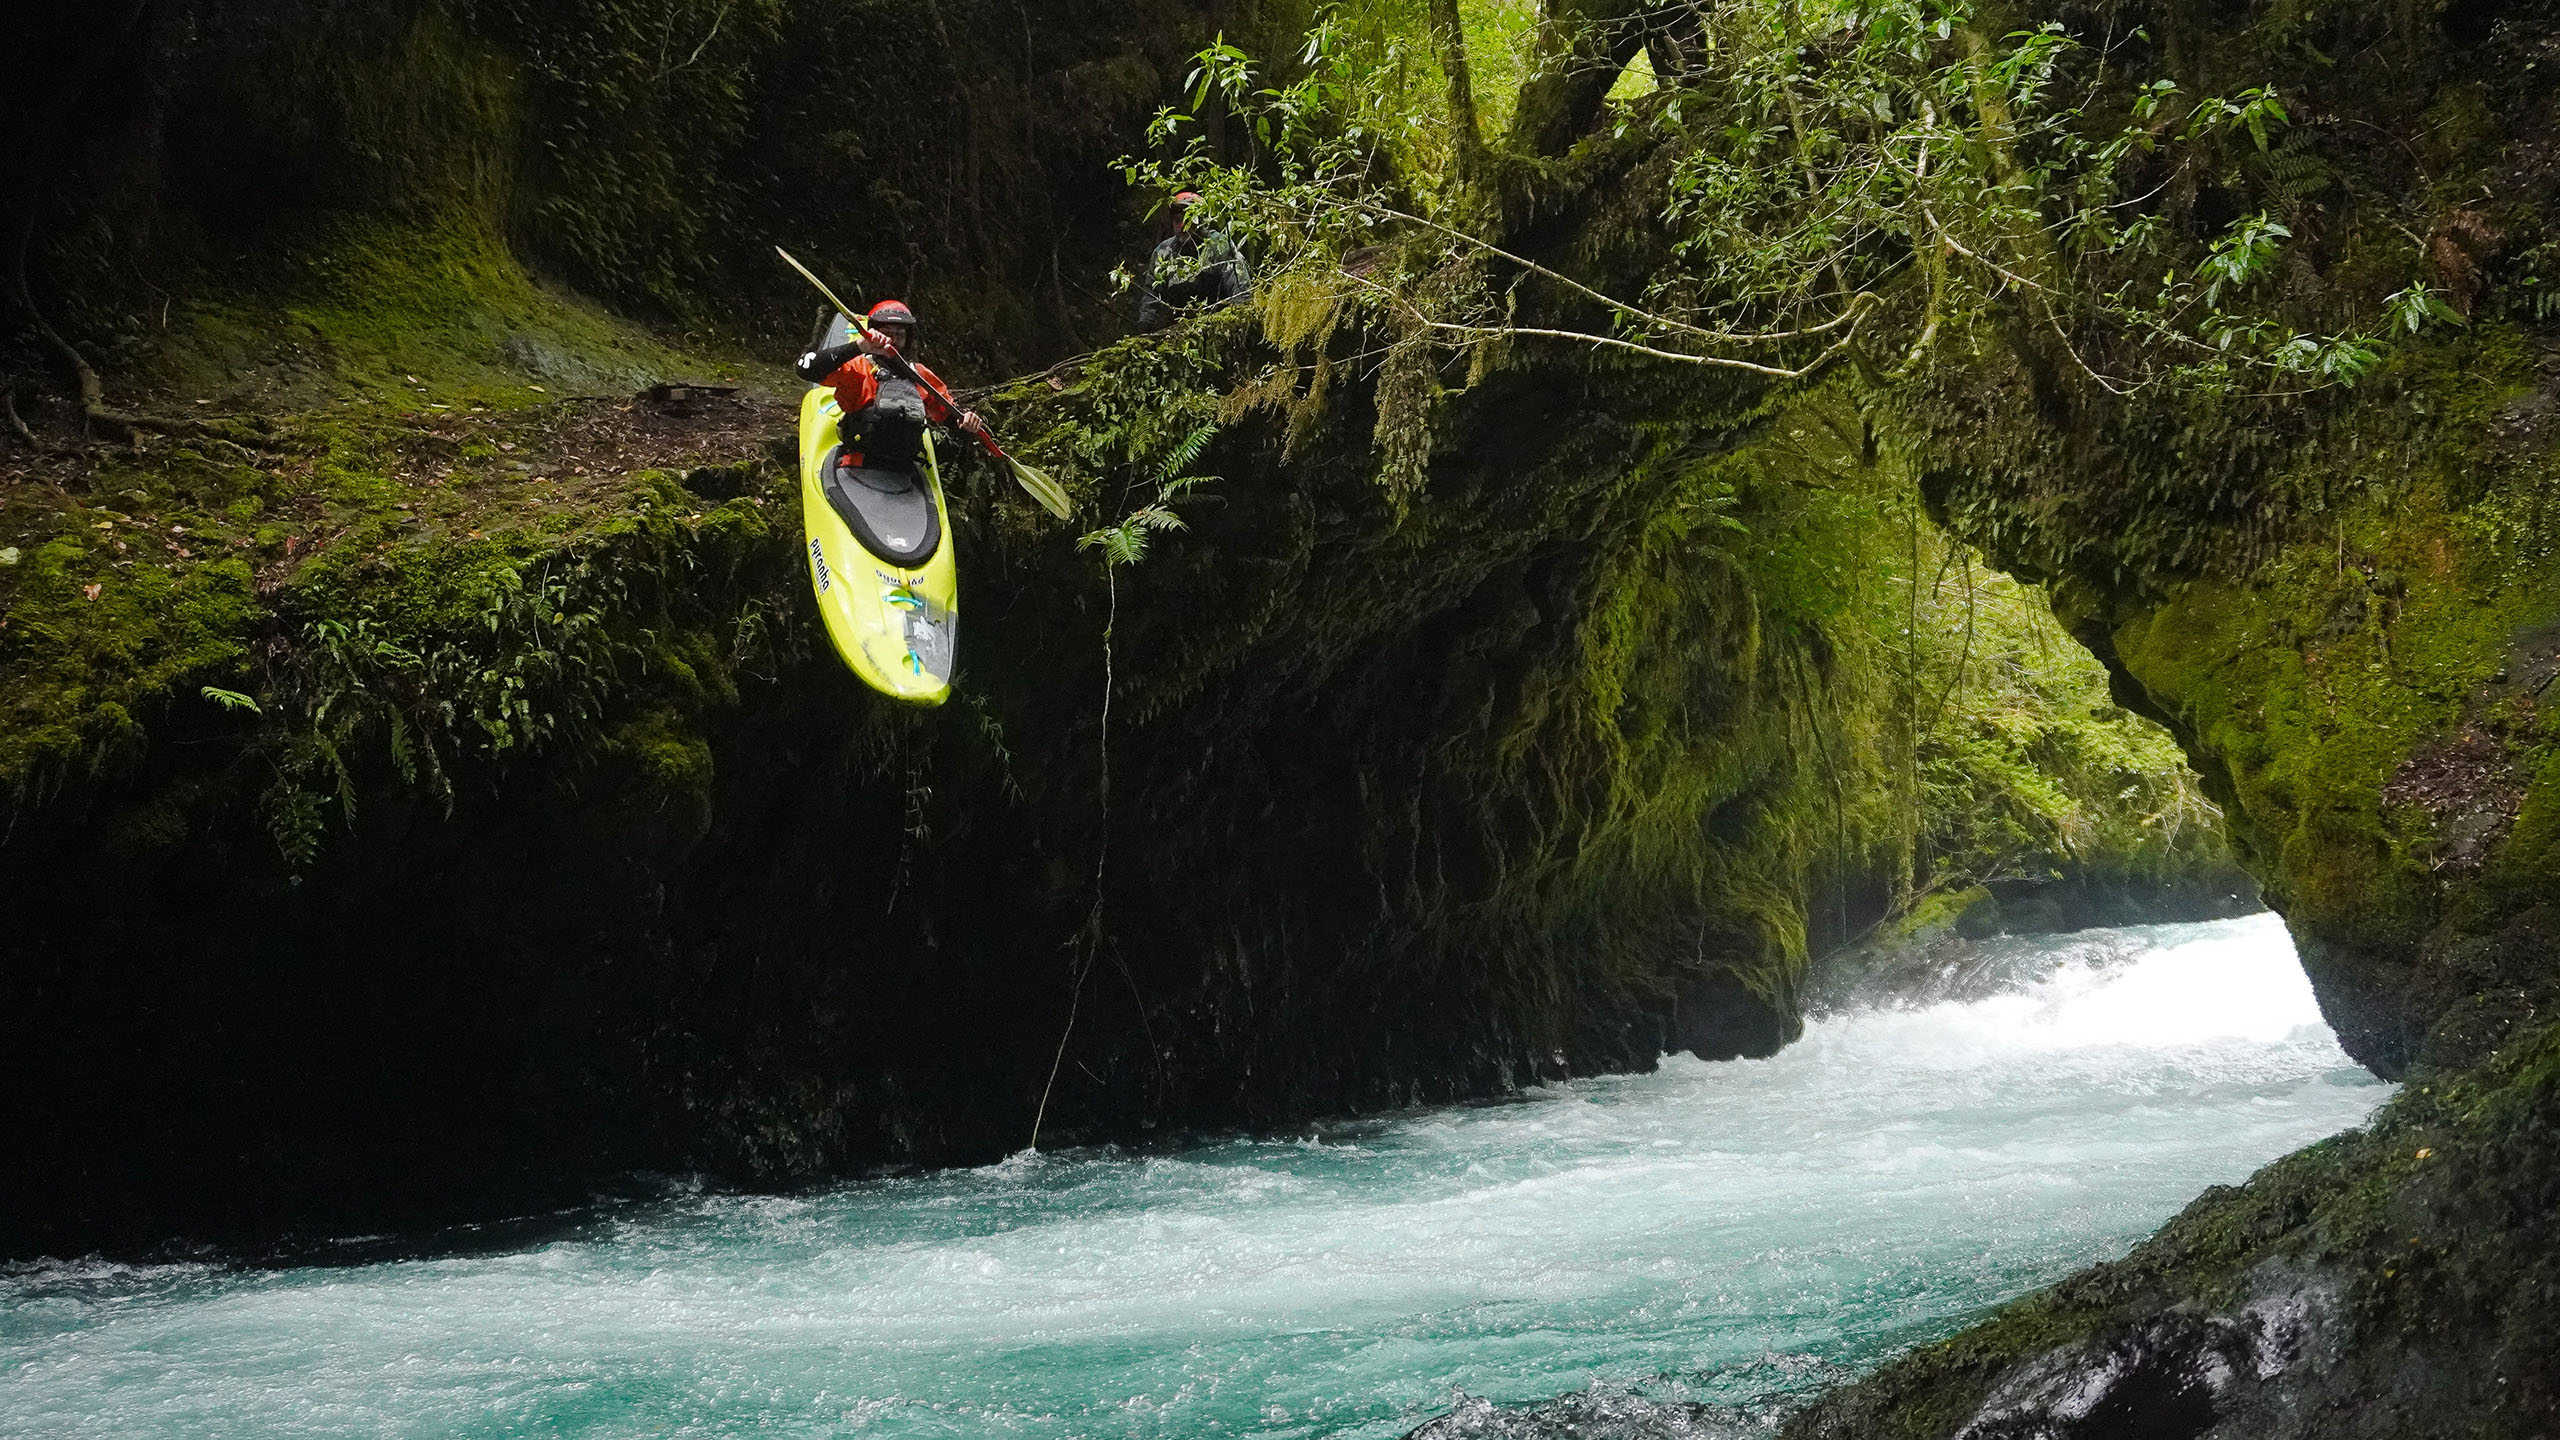 Kayaking in Chile is the Palguin River with seal launch